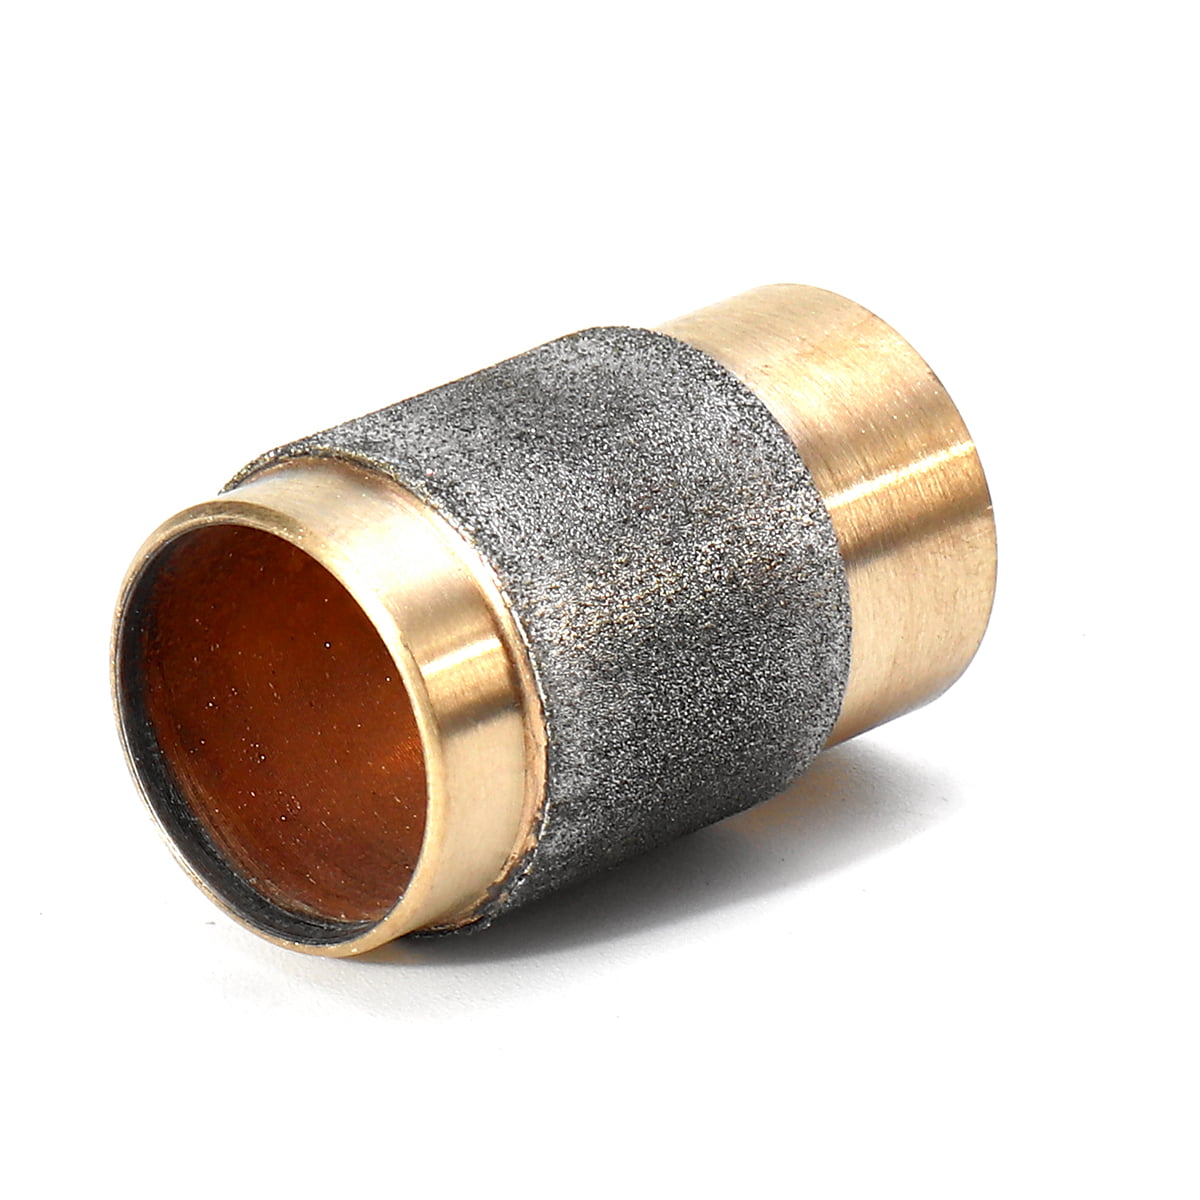 Abrasive Tools 3/4 Inch Durable Grinding Bit Stained Glass Grinder Head Diamond Copper Grinder Amoladora